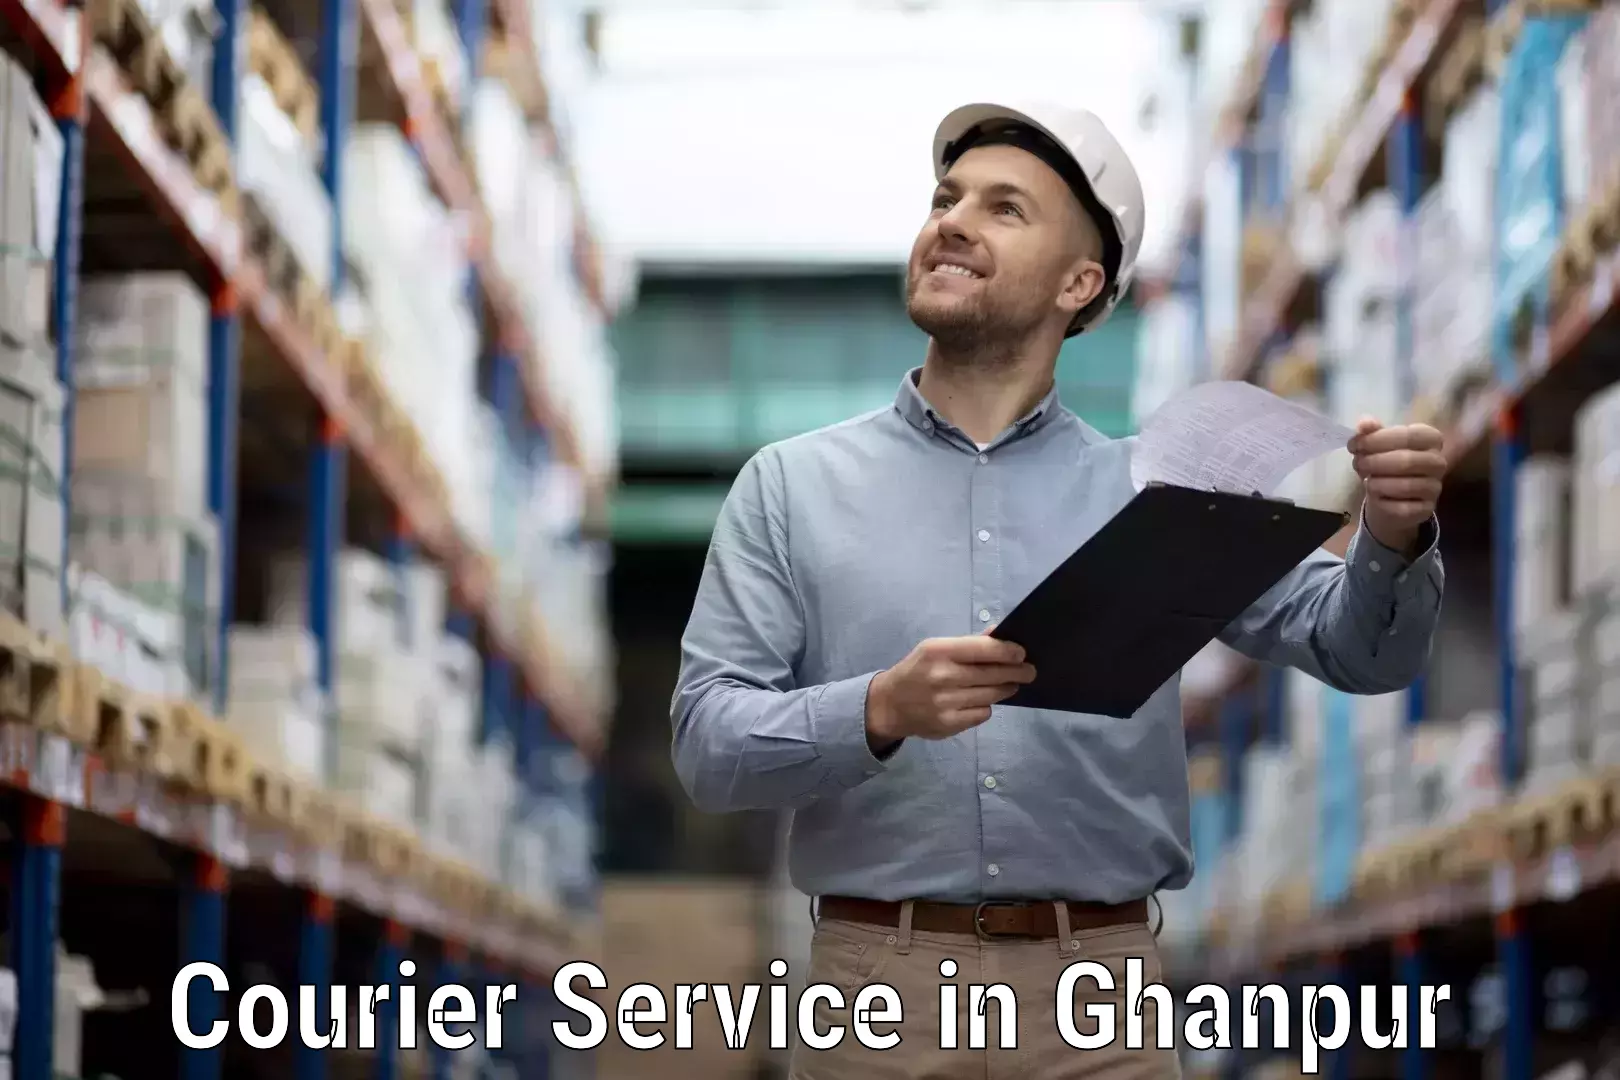 On-call courier service in Ghanpur